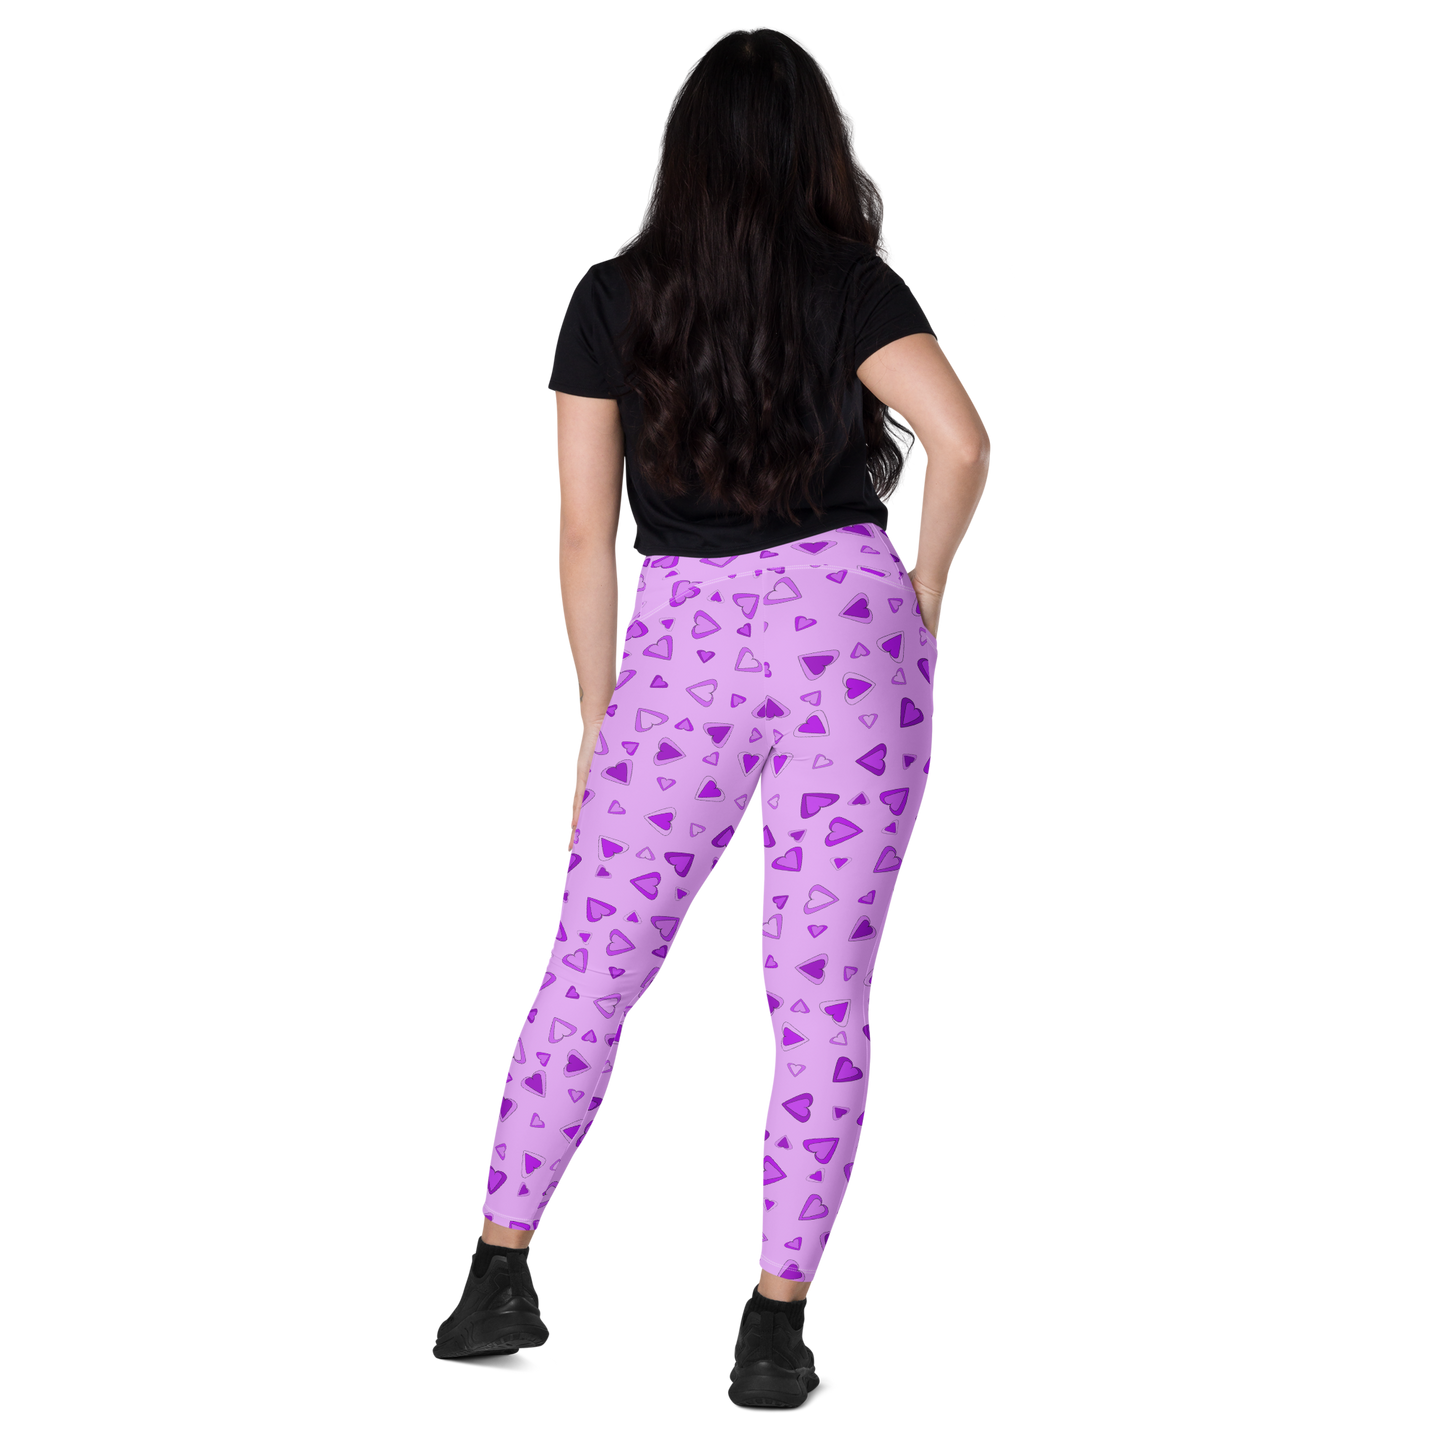 Rainbow Of Hearts | Batch 01 | Seamless Patterns | All-Over Print Crossover Leggings with Pockets - #3